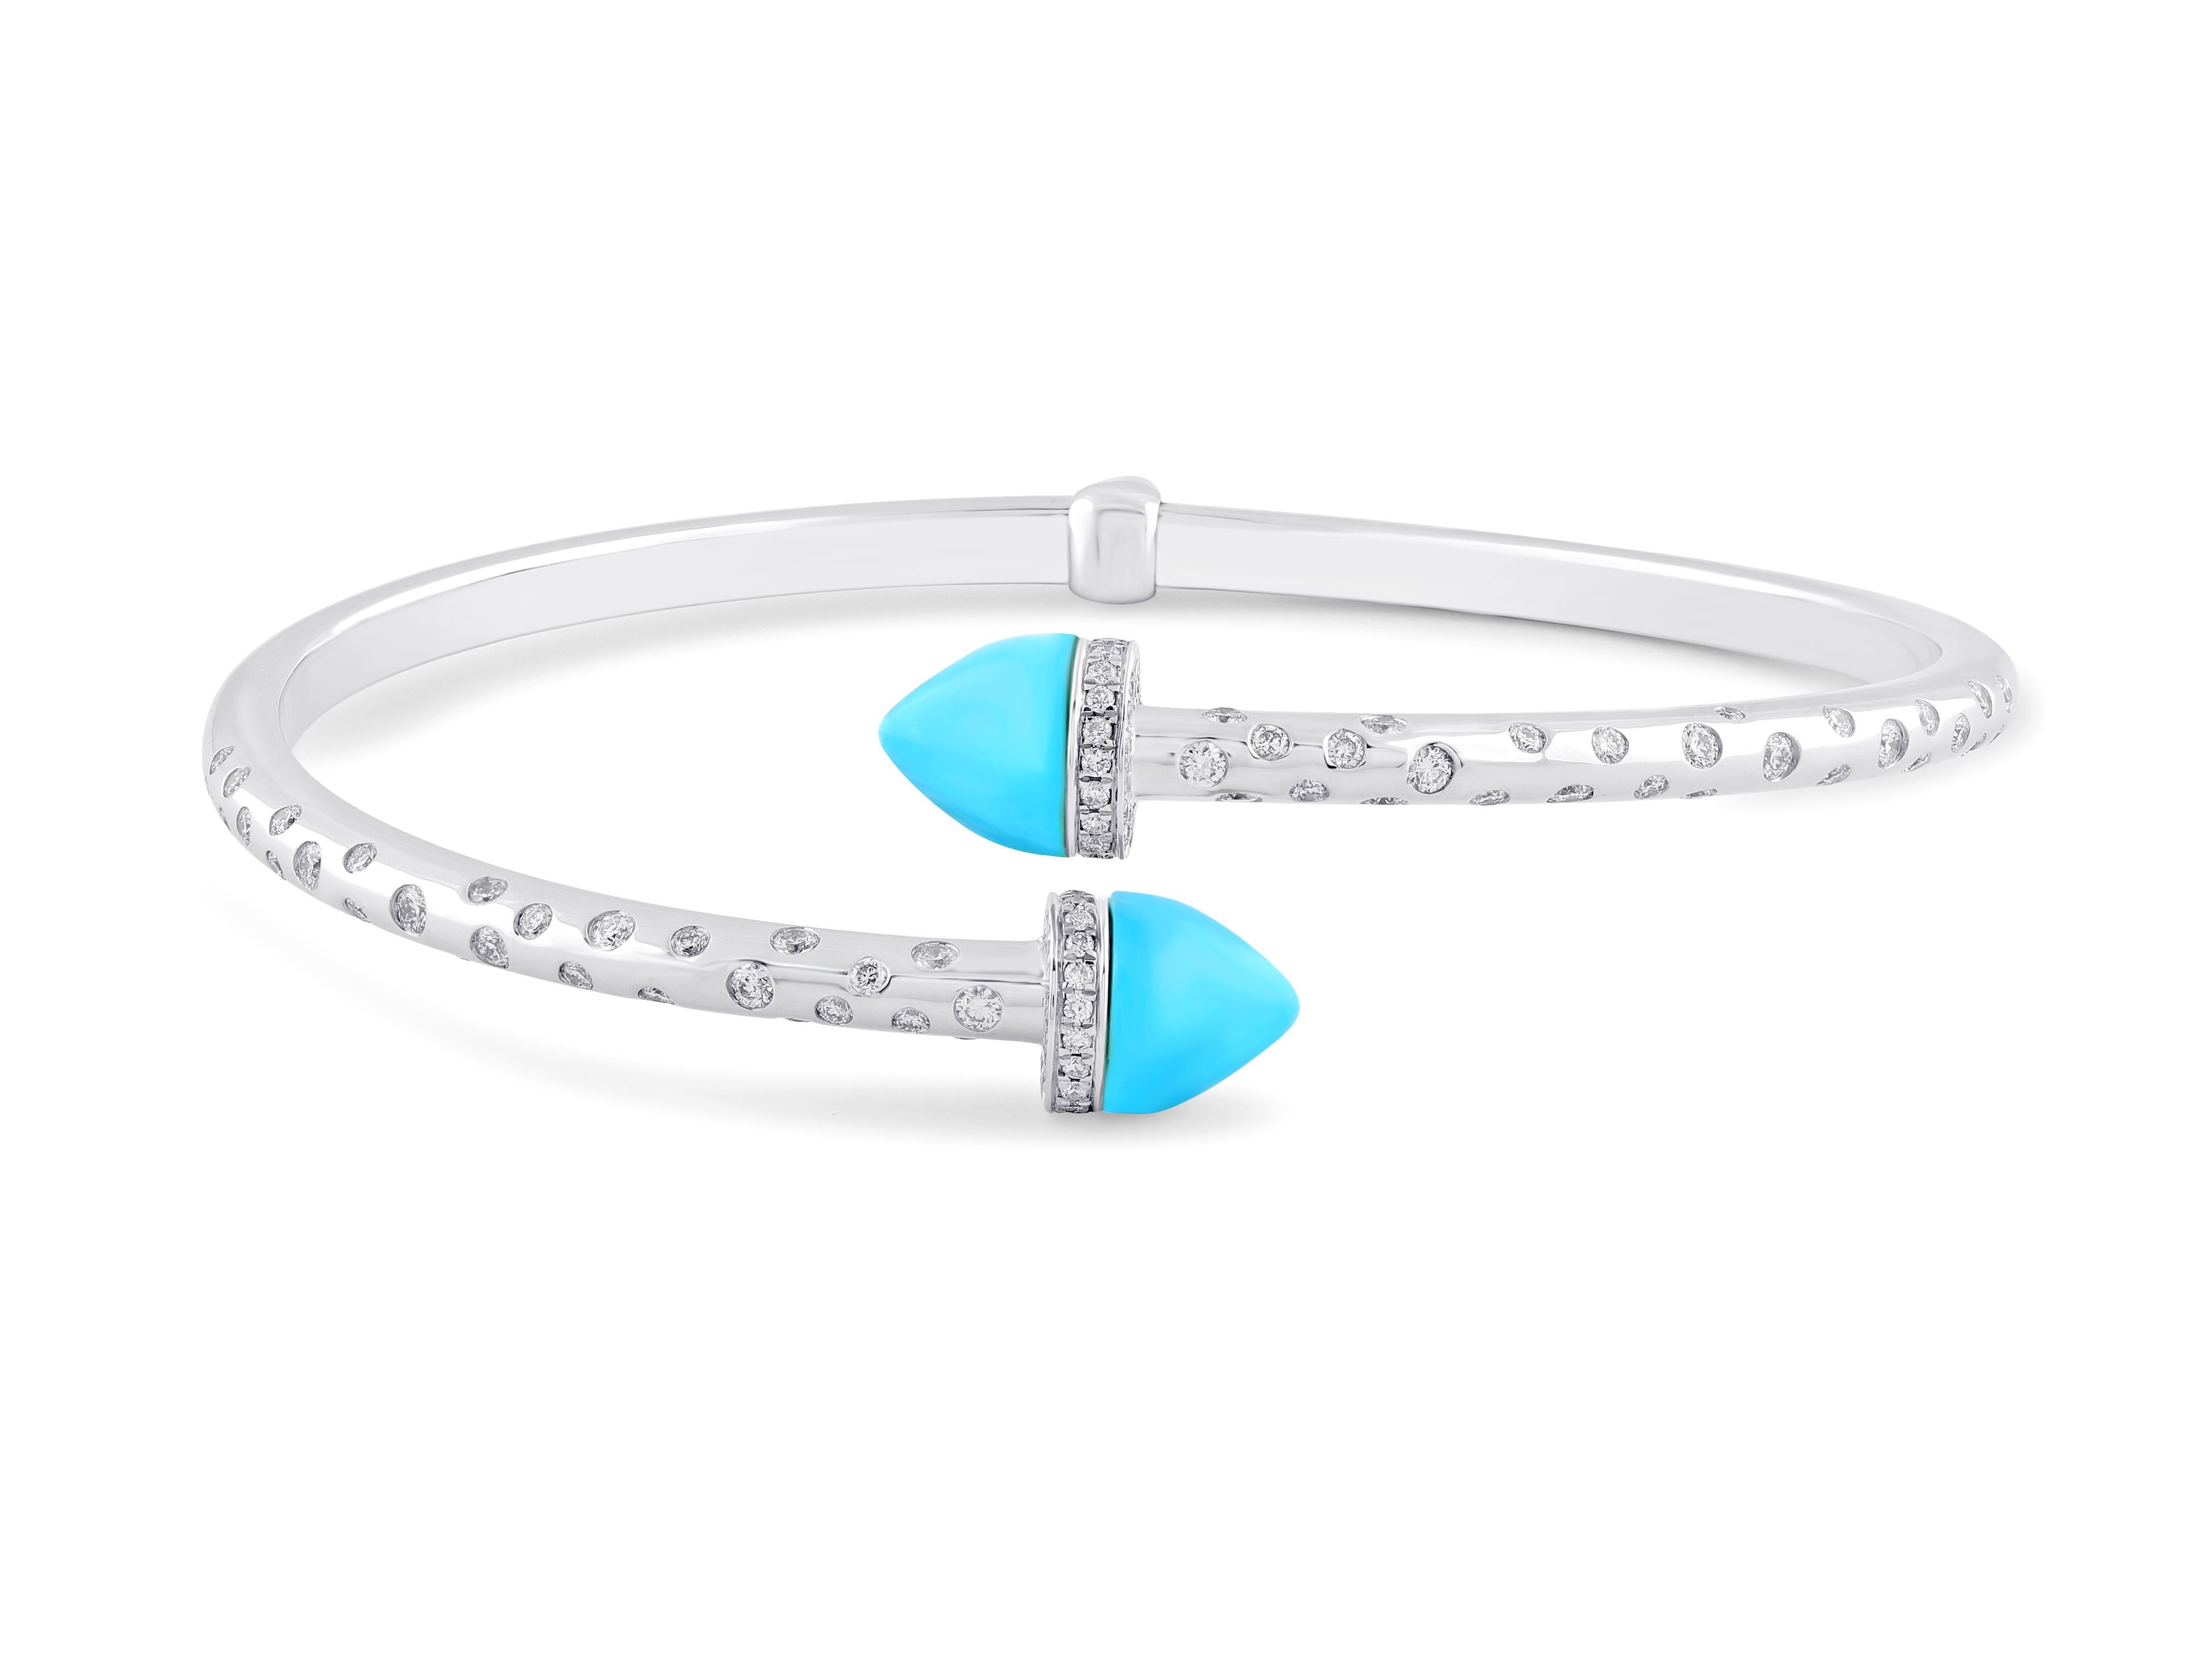 Minimalistic design and hand-crafted gemstones blend to create the elegance of the Atelo Arrow Collection.

This modern bracelet uses stunning, hand-cut turquoise- with its vibrant yet calming colour- carved like the tip of an arrow.

White,